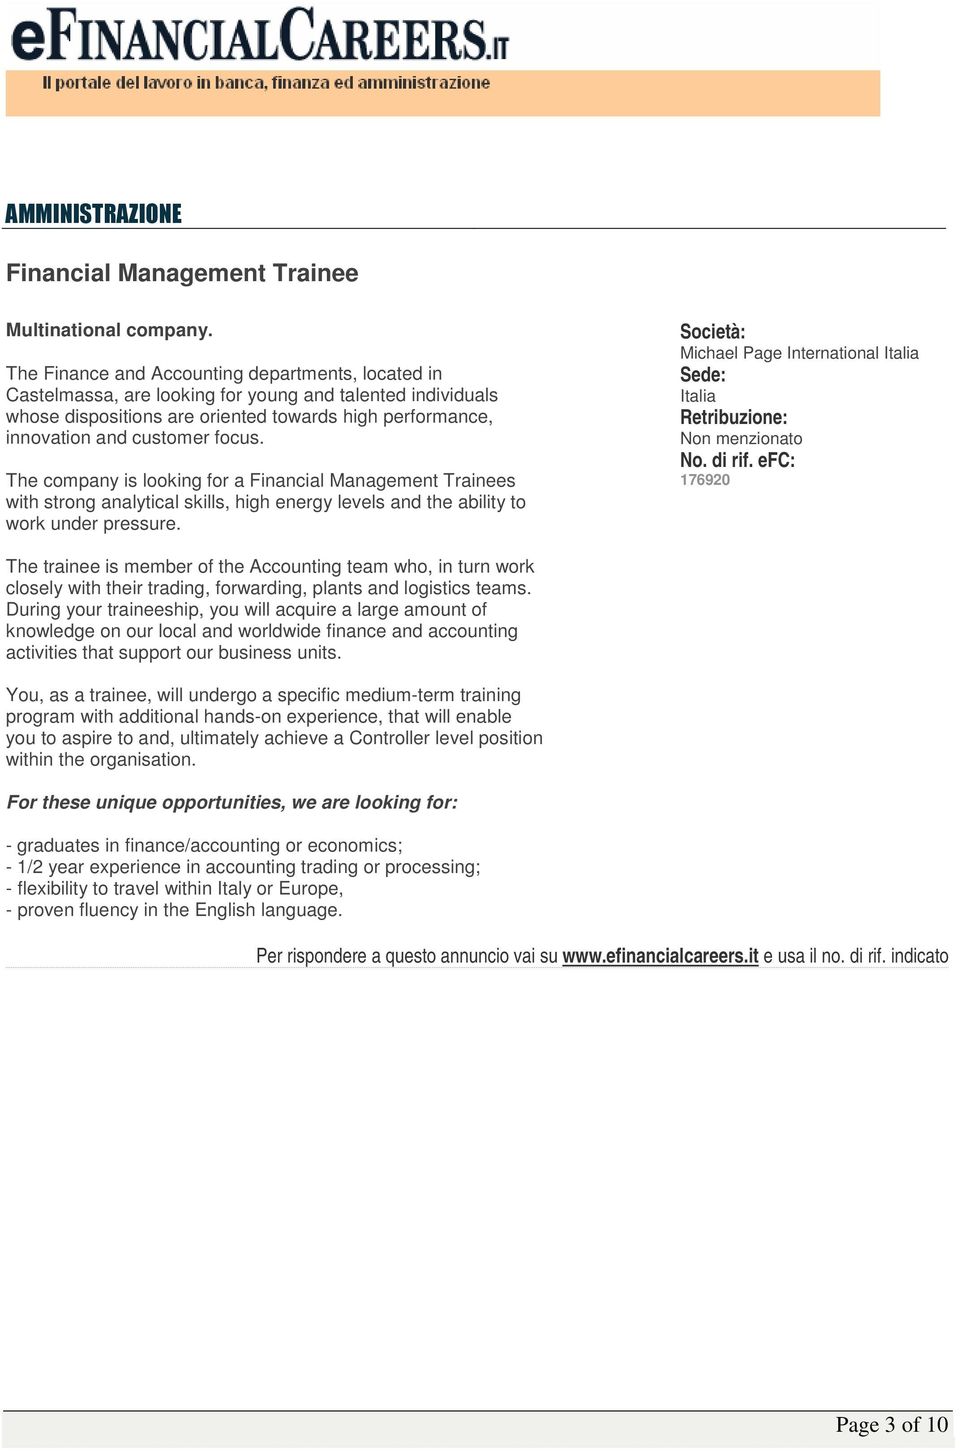 The company is looking for a Financial Management Trainees with strong analytical skills, high energy levels and the ability to work under pressure.